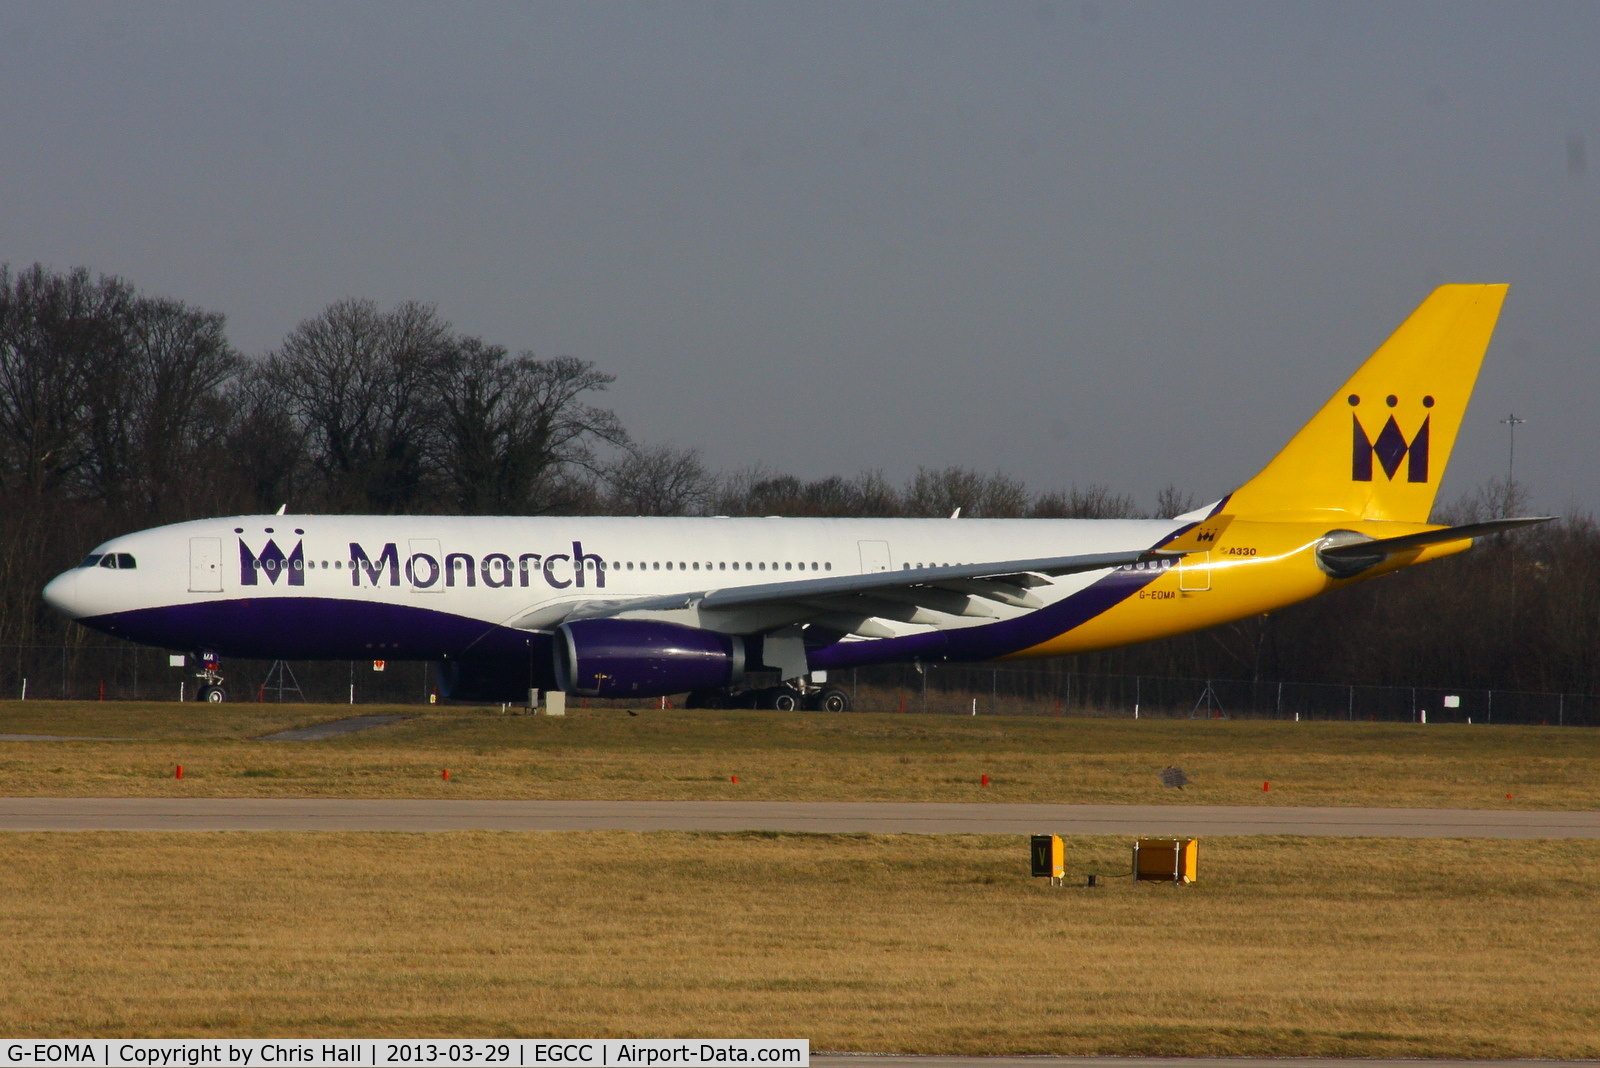 G-EOMA, 1999 Airbus A330-243 C/N 265, in Monarch's 